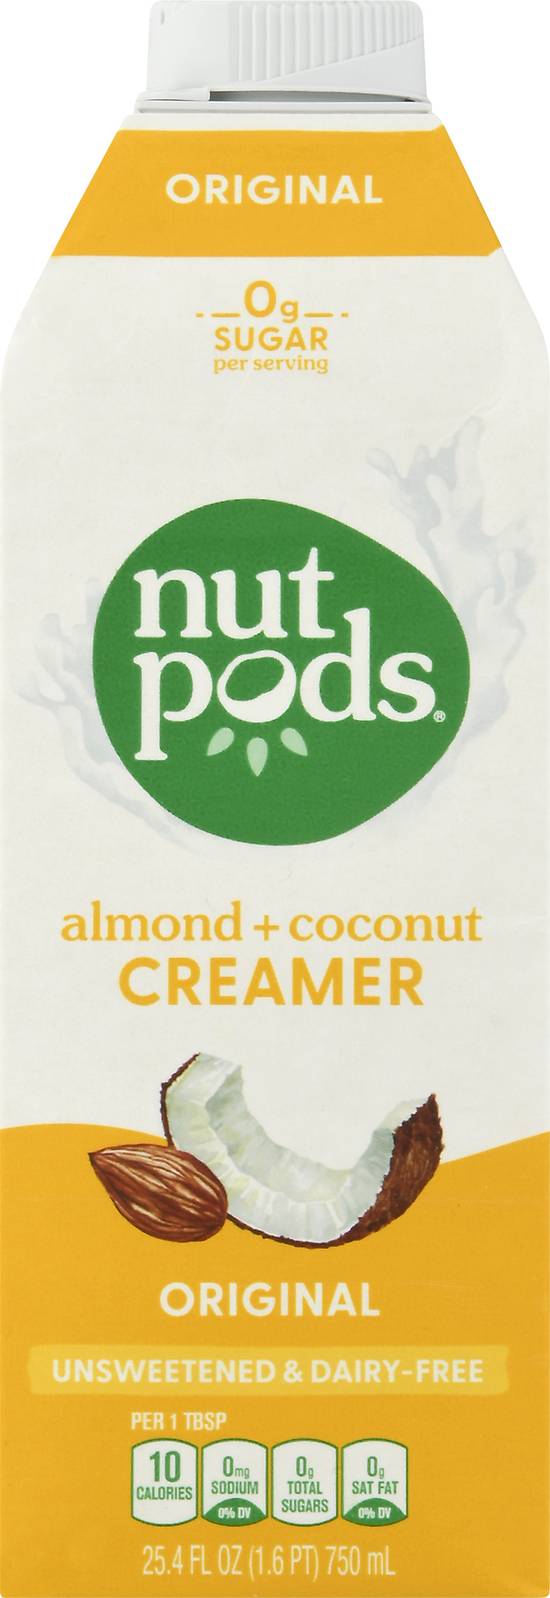 Nutpods Creamer (almond and coconut)